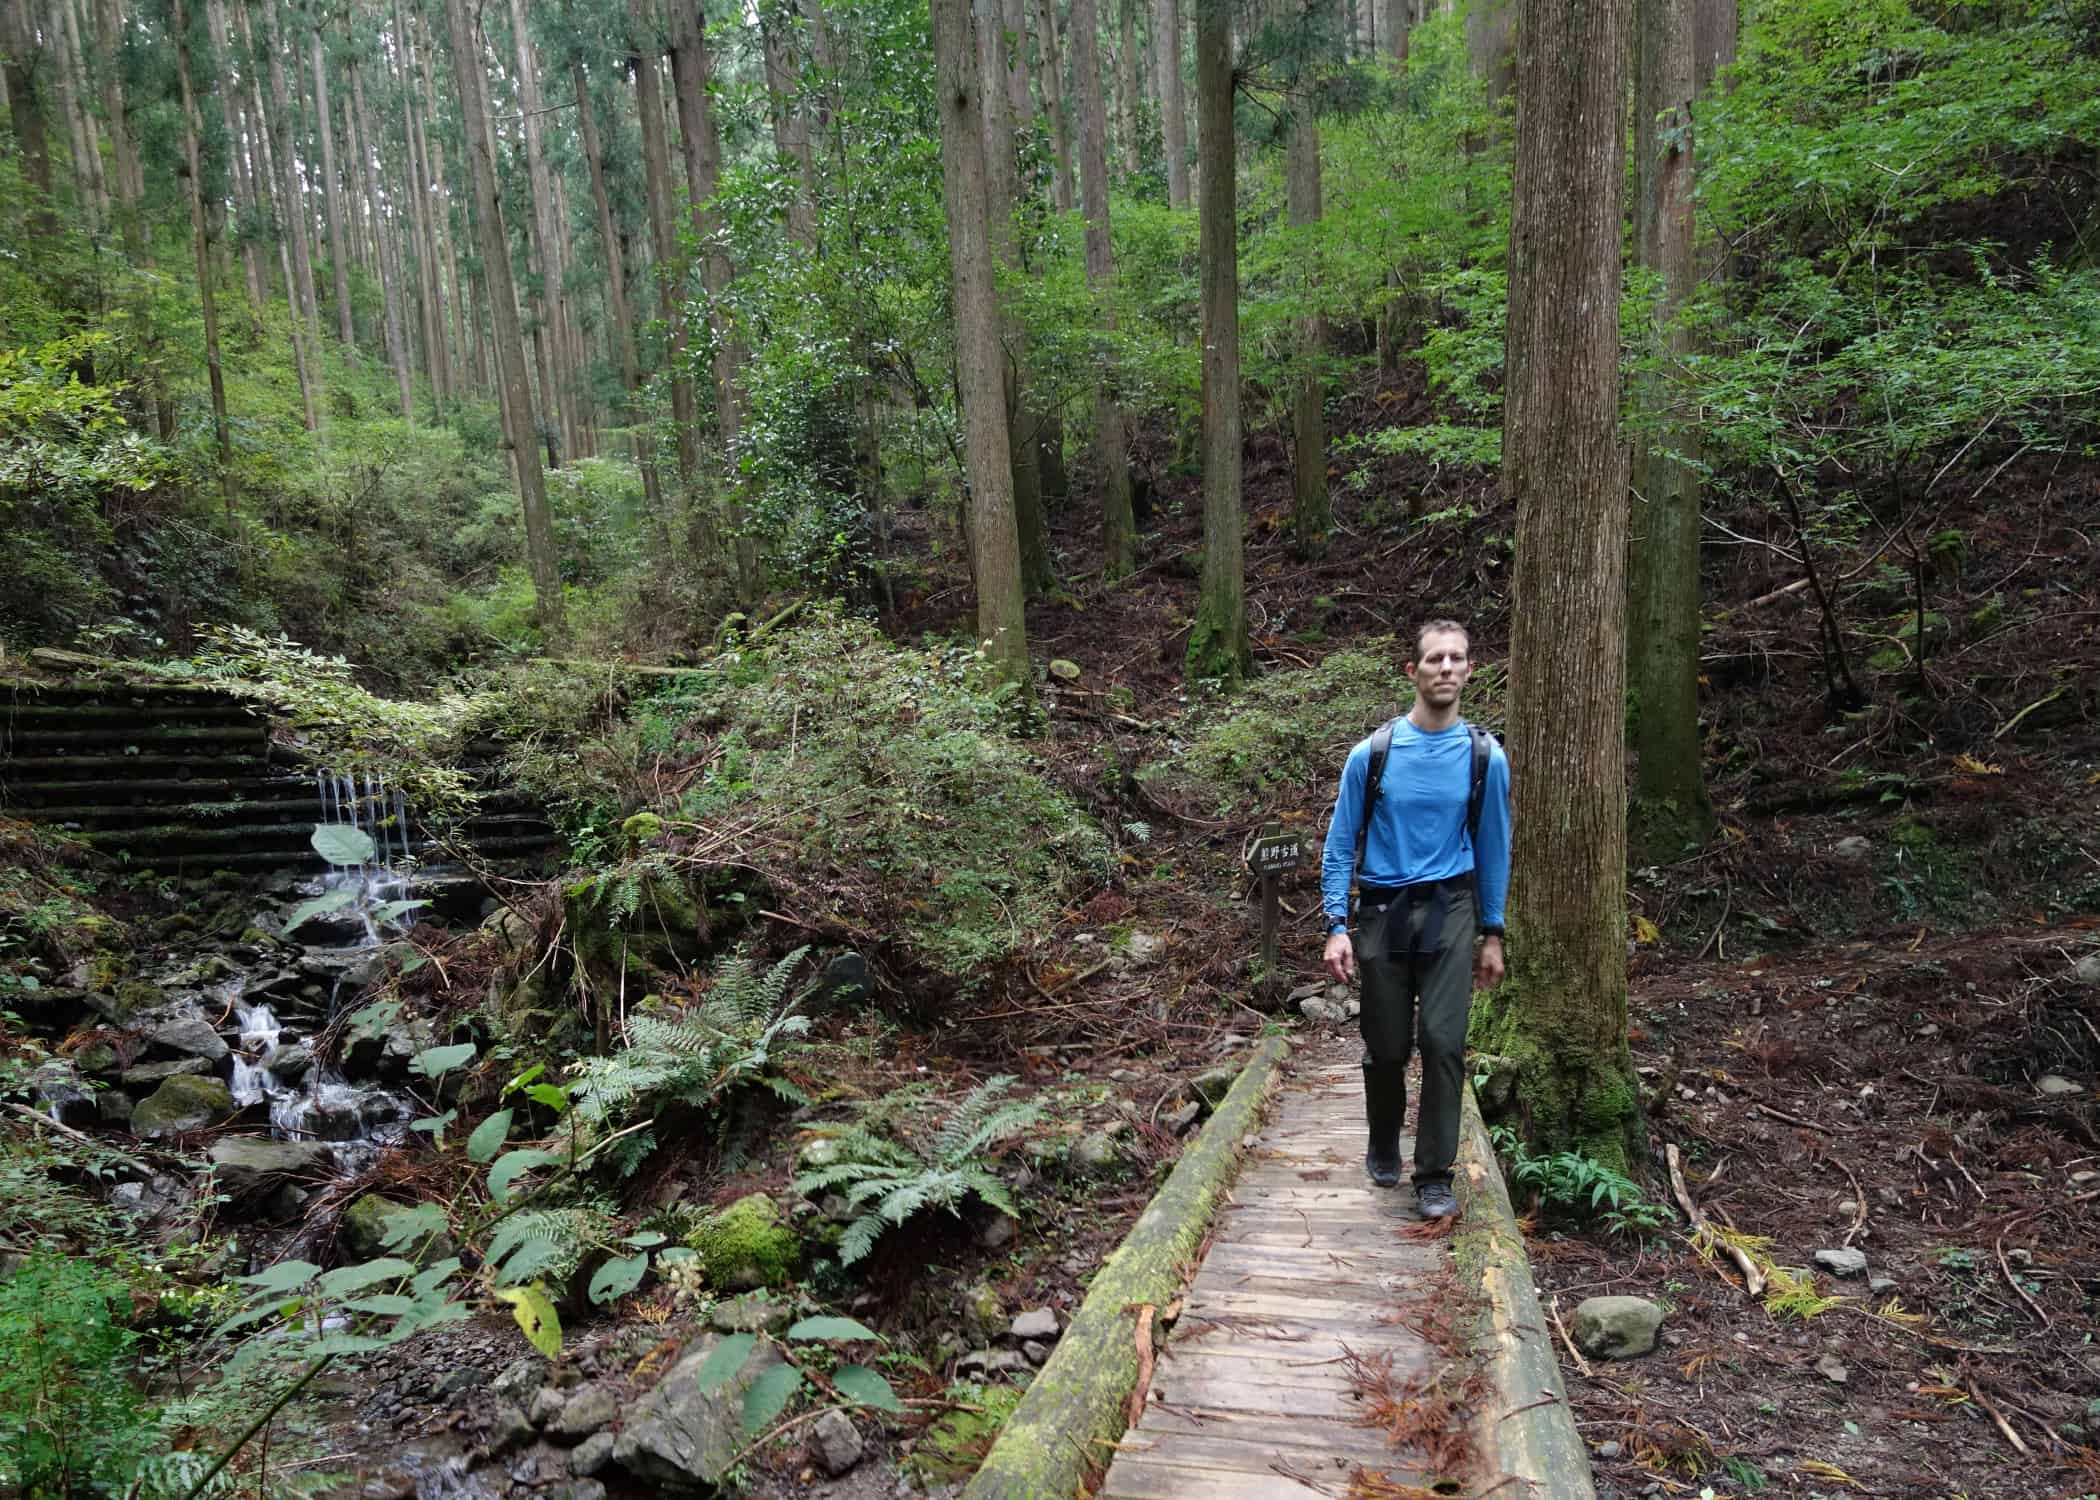 Fast-Hiking the Kumano Kodo, Fittingly for a Mountain Ascetic’s Pilgrimage Path